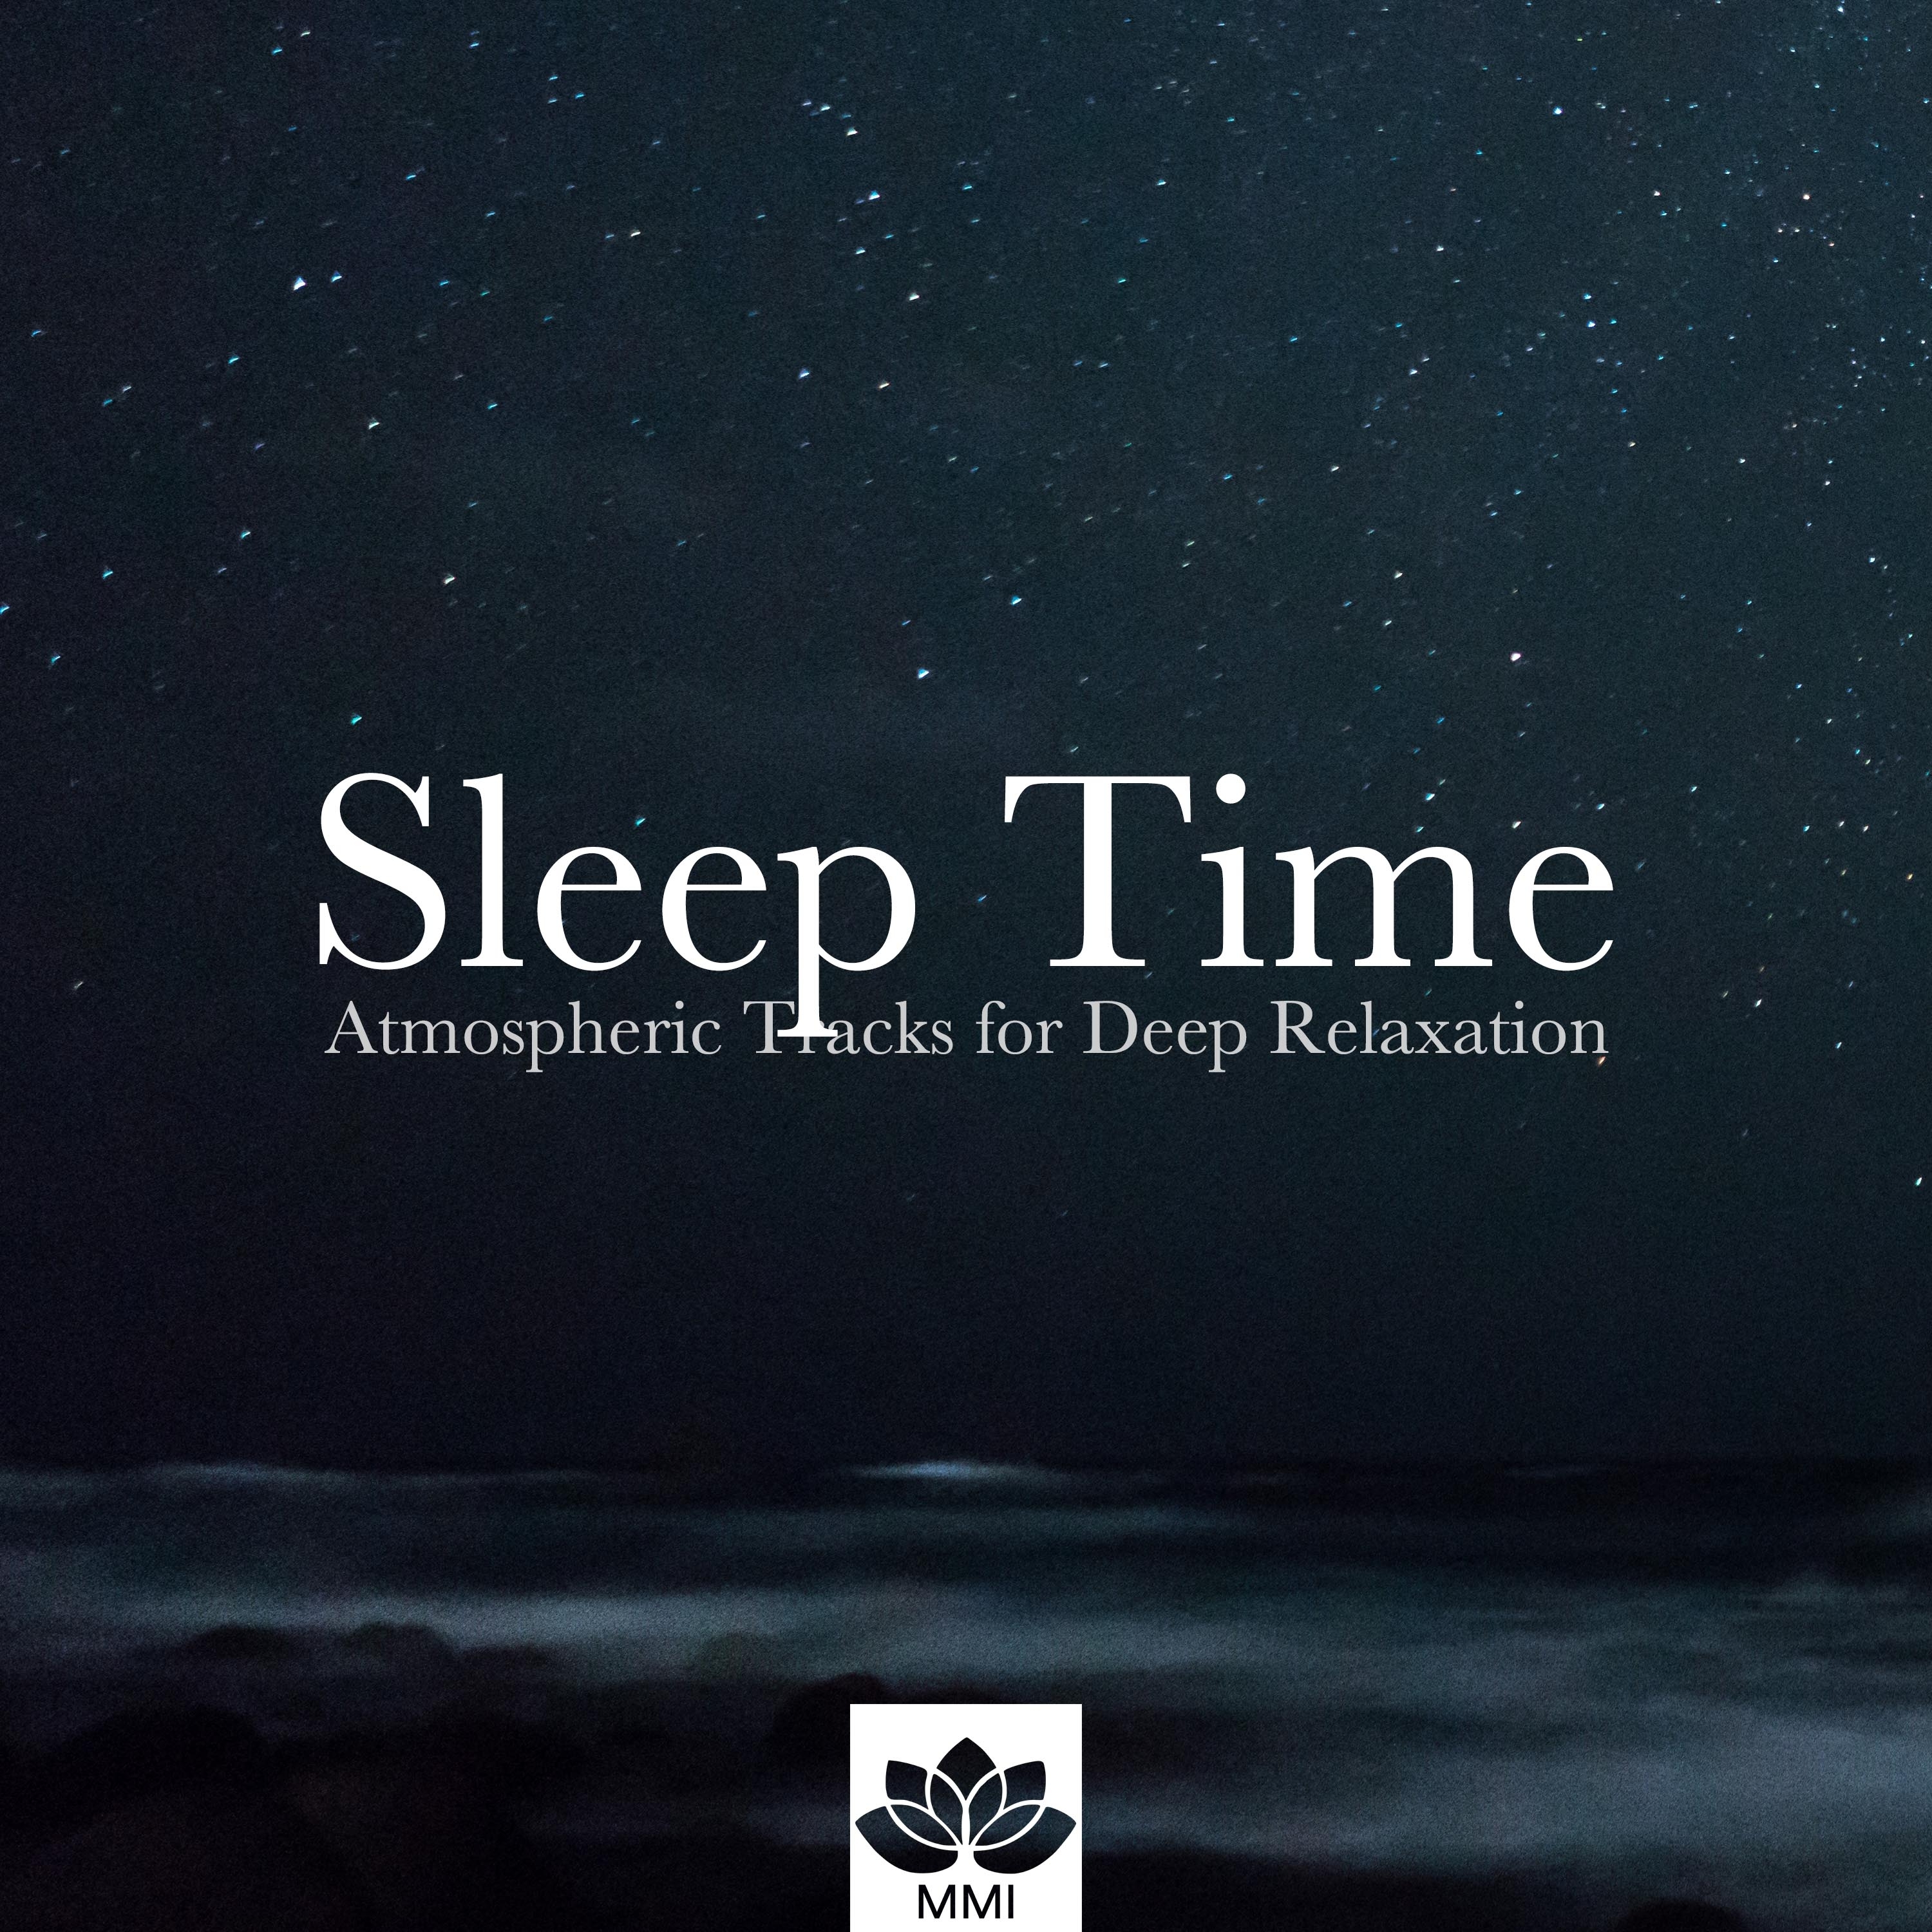 Sleep Time: Chilled Out, Meditative Music, Atmospheric Tracks for Deep Relaxation